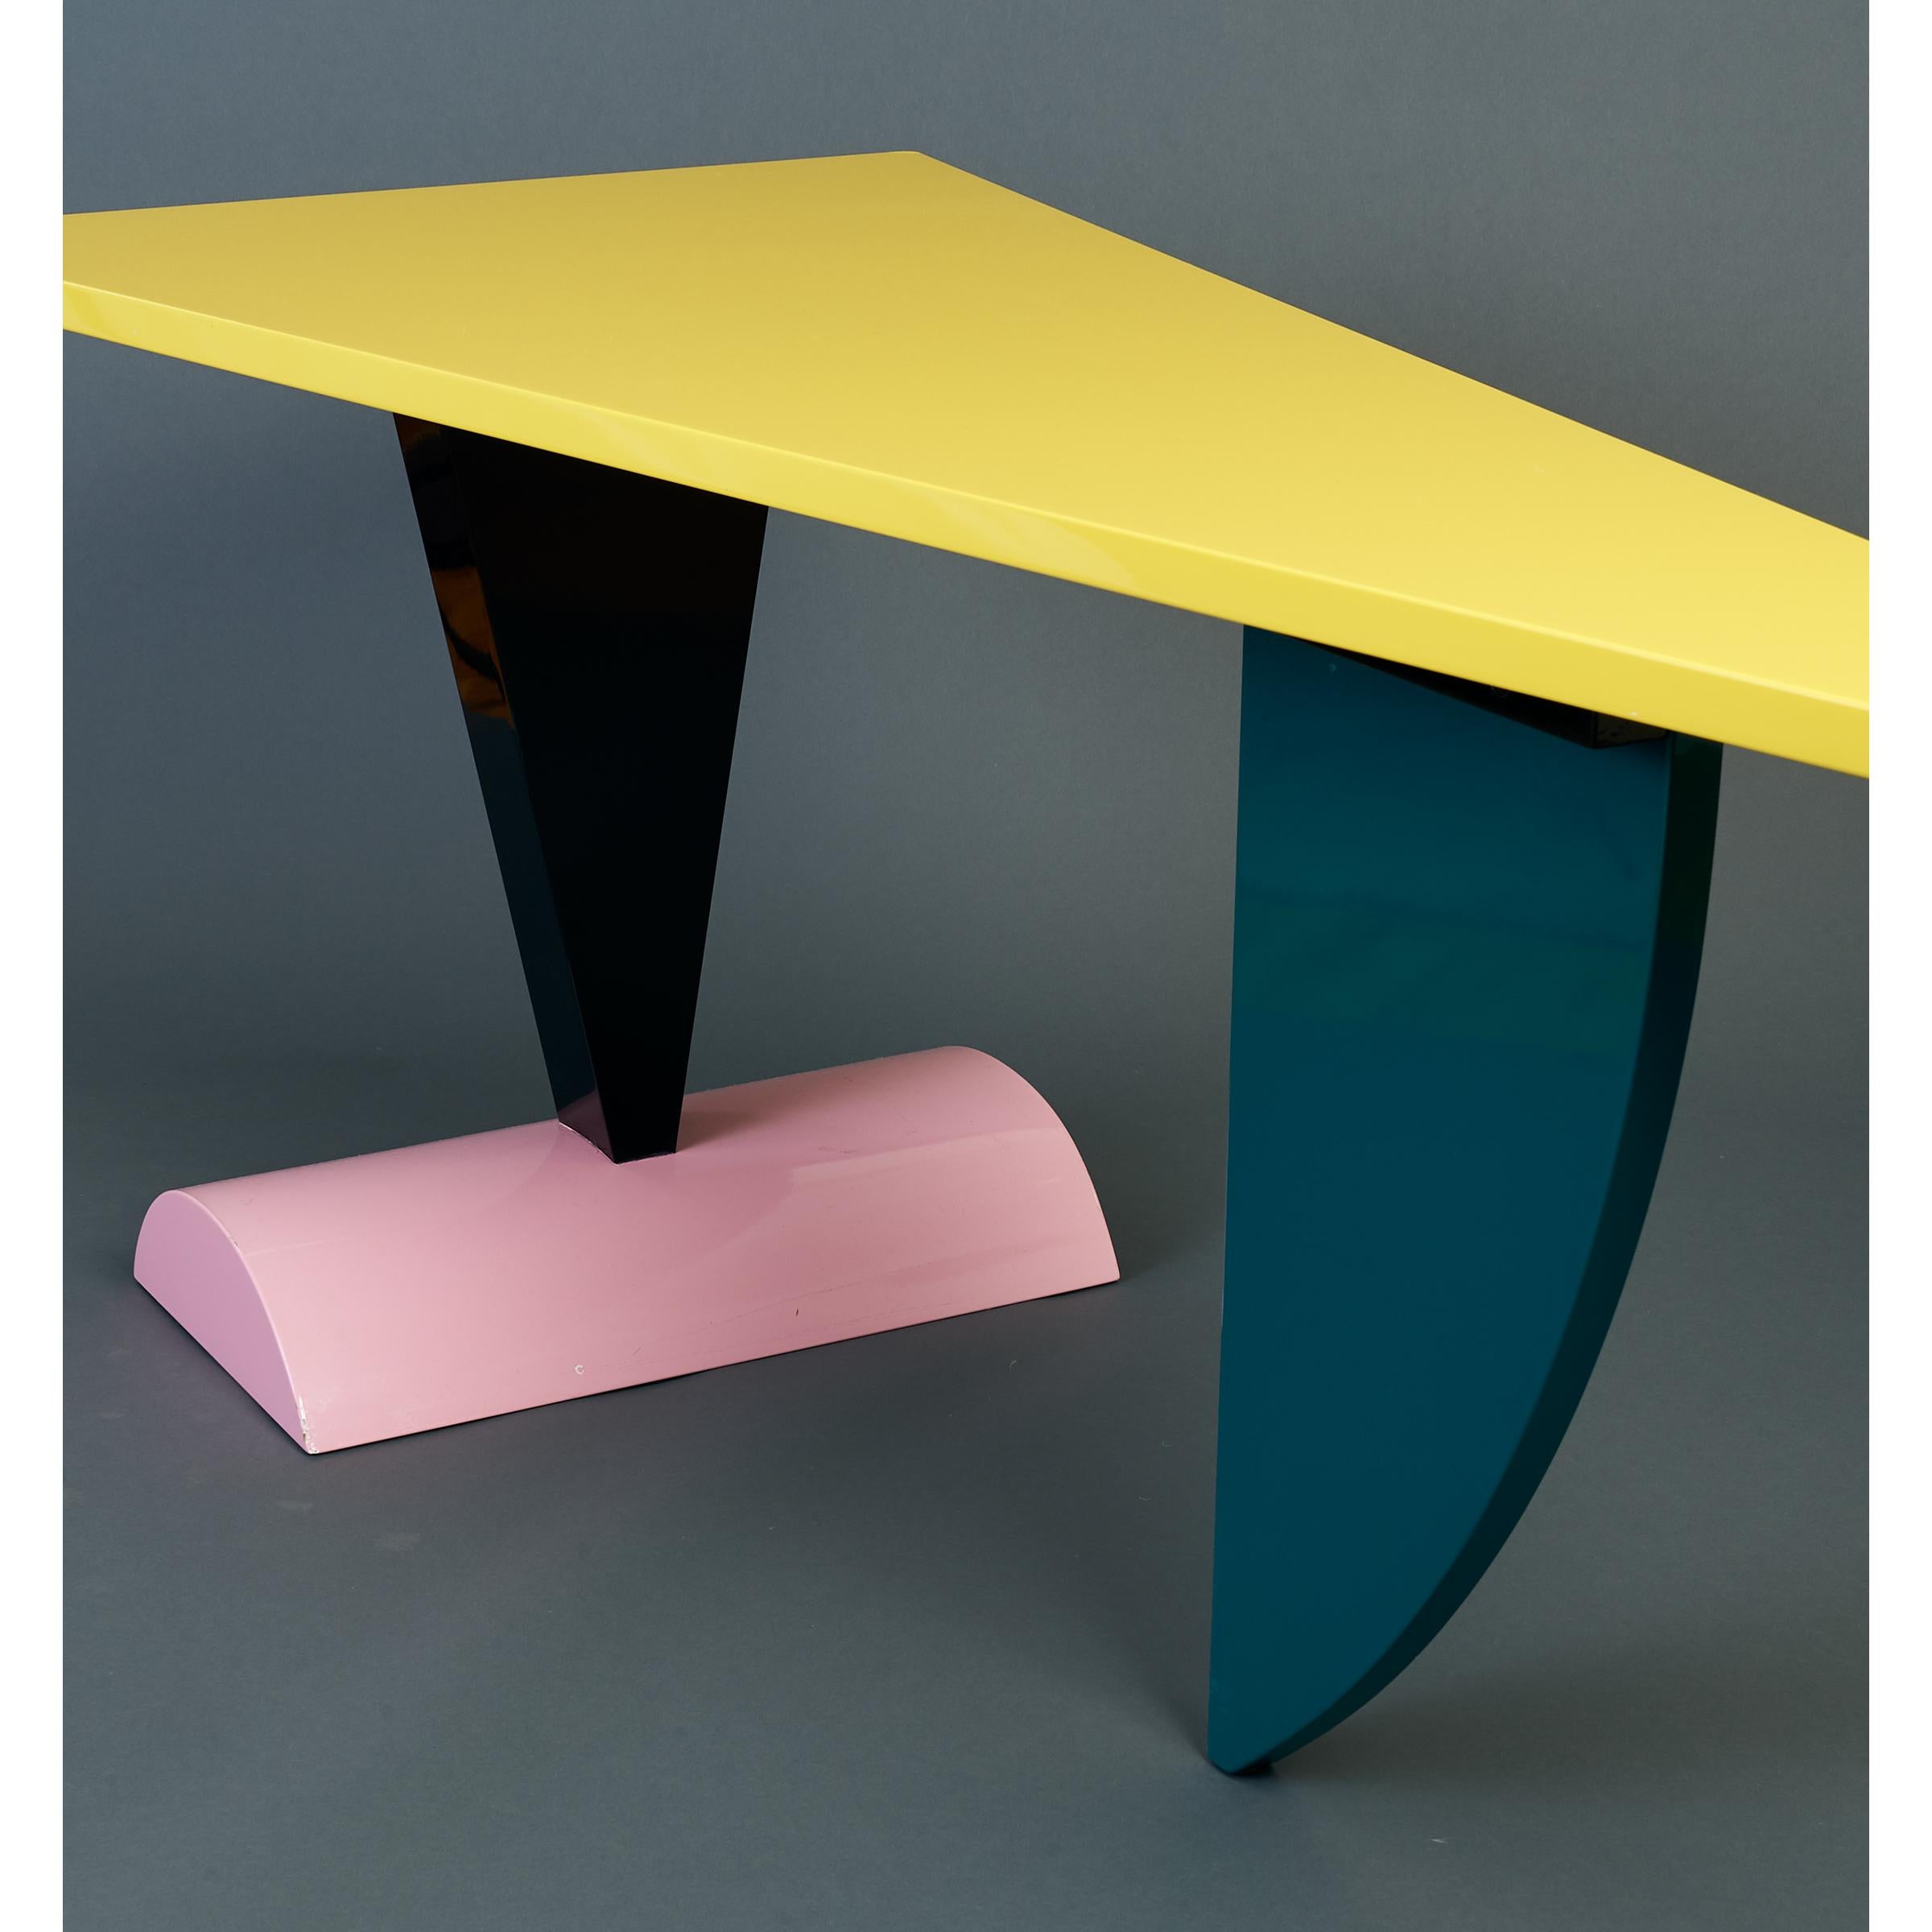 Peter Shire: Original Memphis Milano Brazil Table in Lacquered Wood, Italy 1981 im Angebot 1